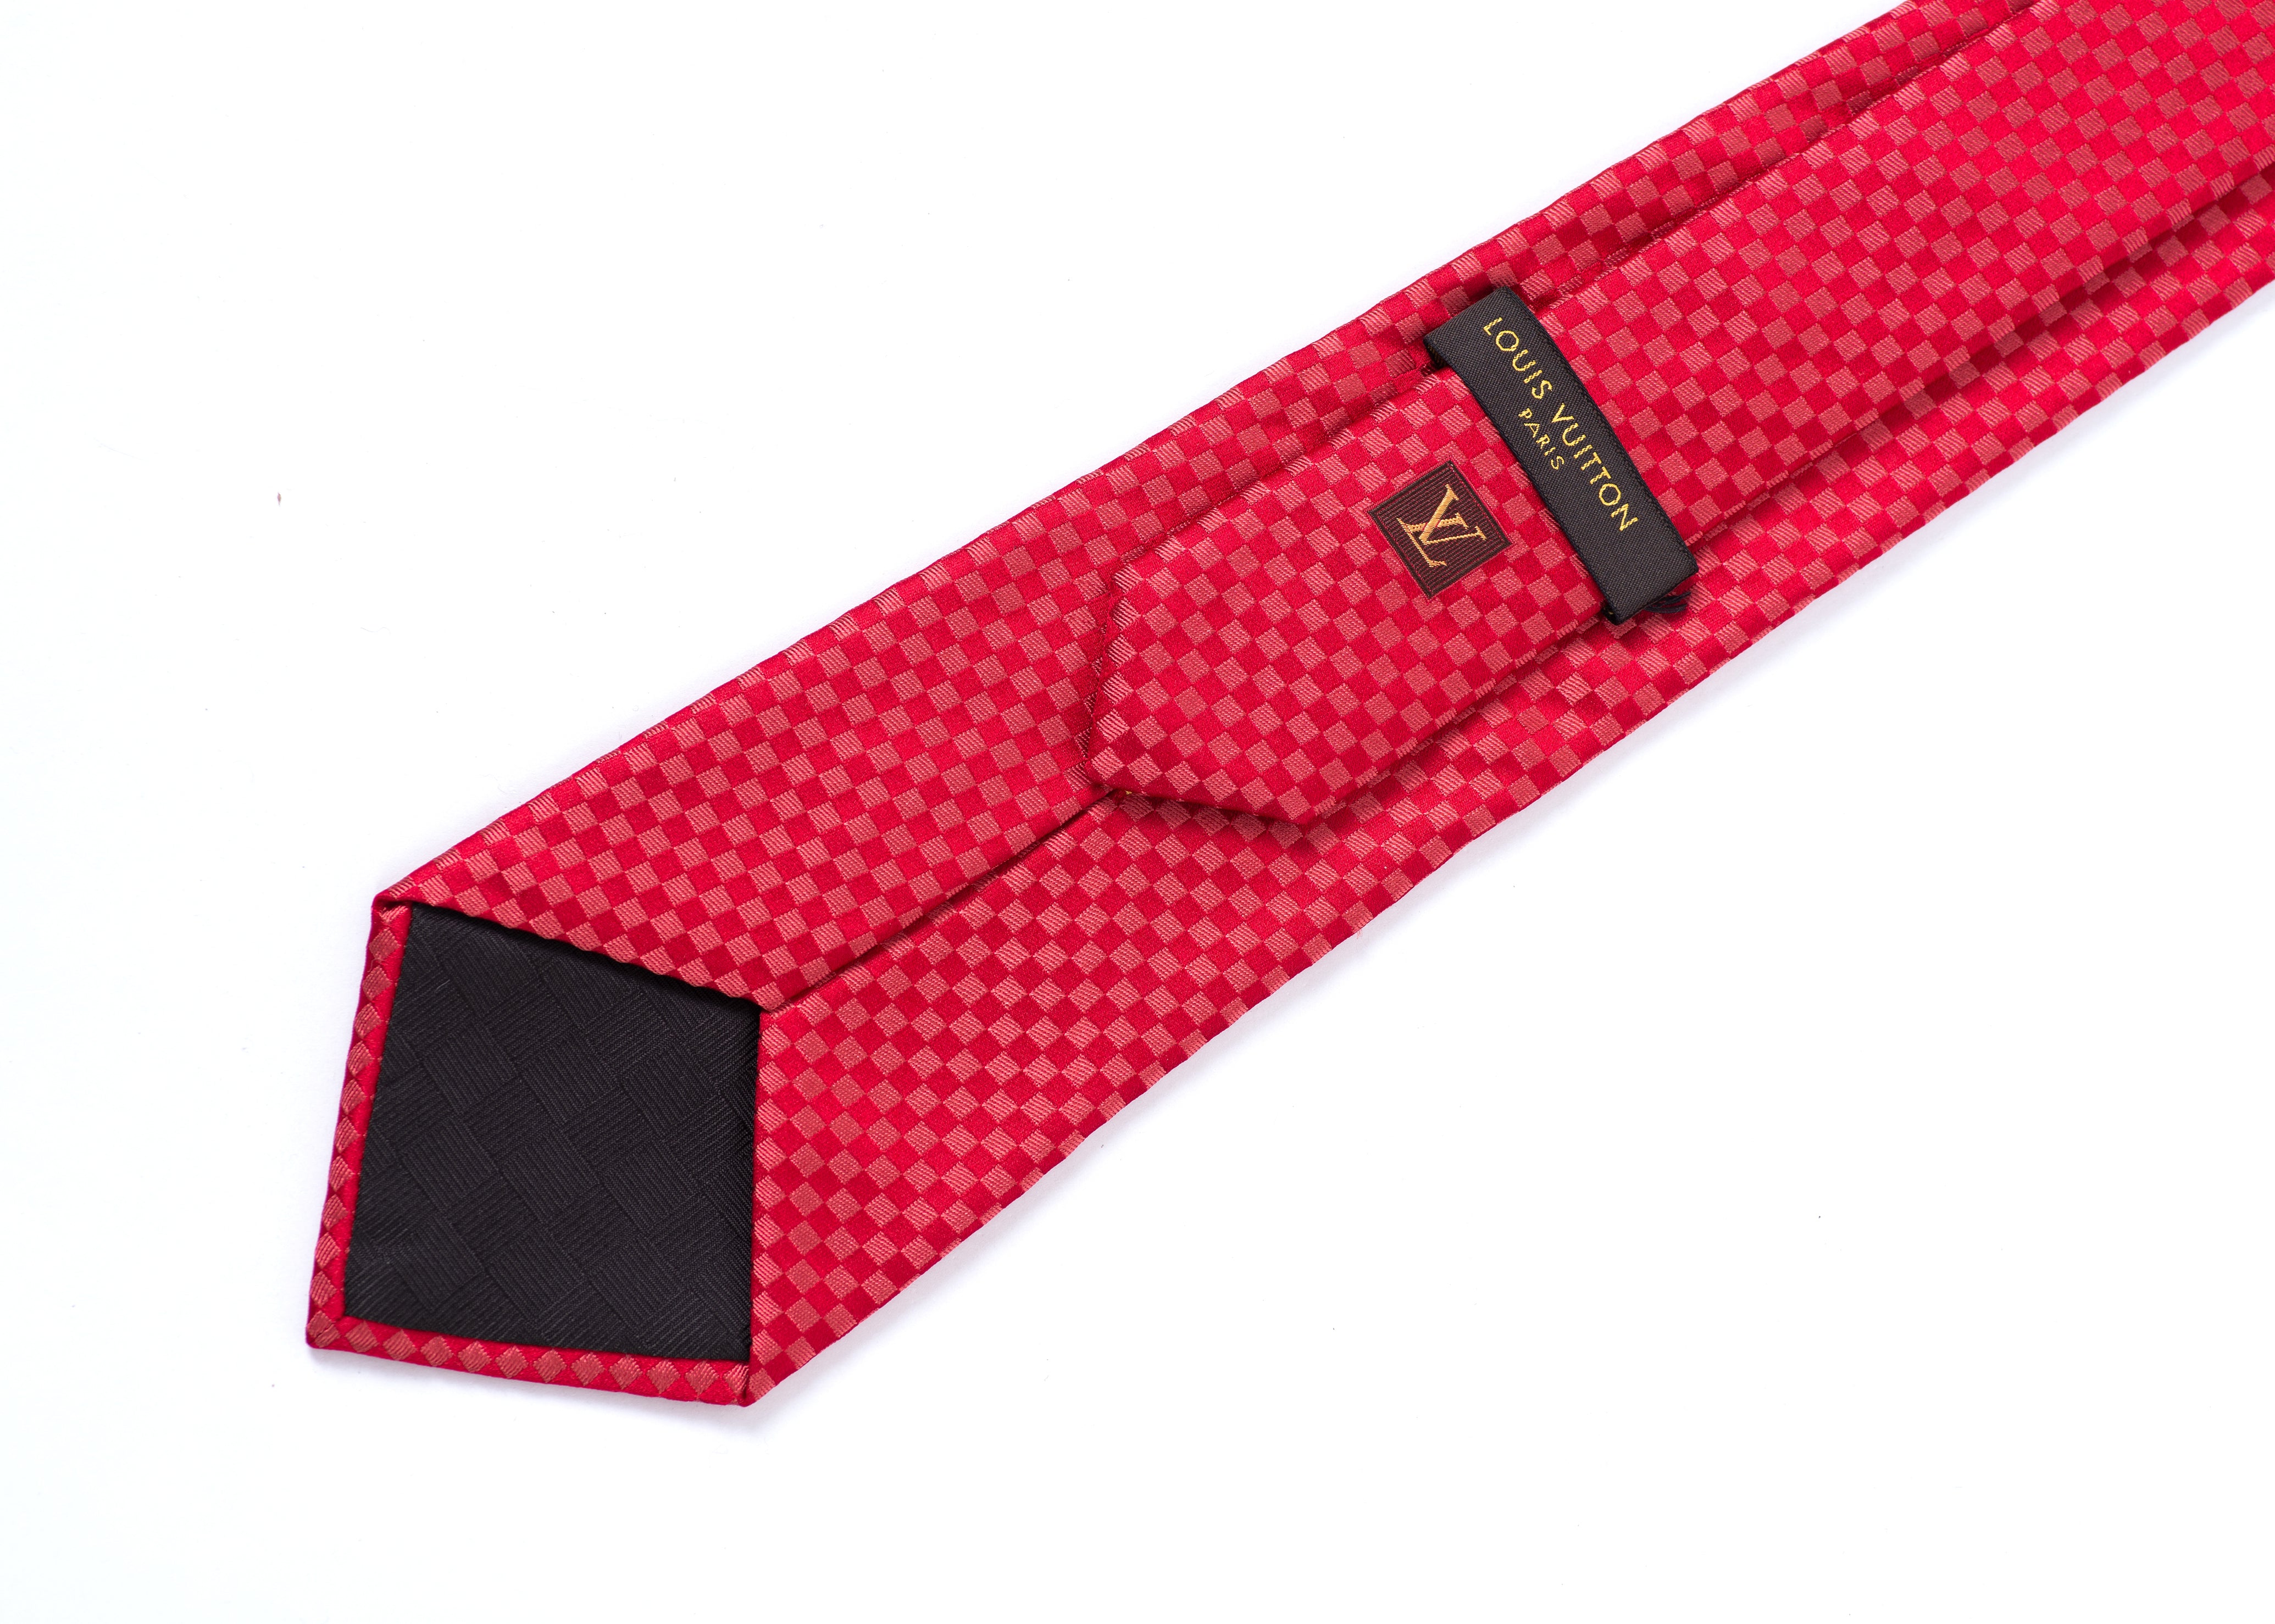 Louis Vuitton Gold Micro Damier Classic Pattern Checked Silk Tie